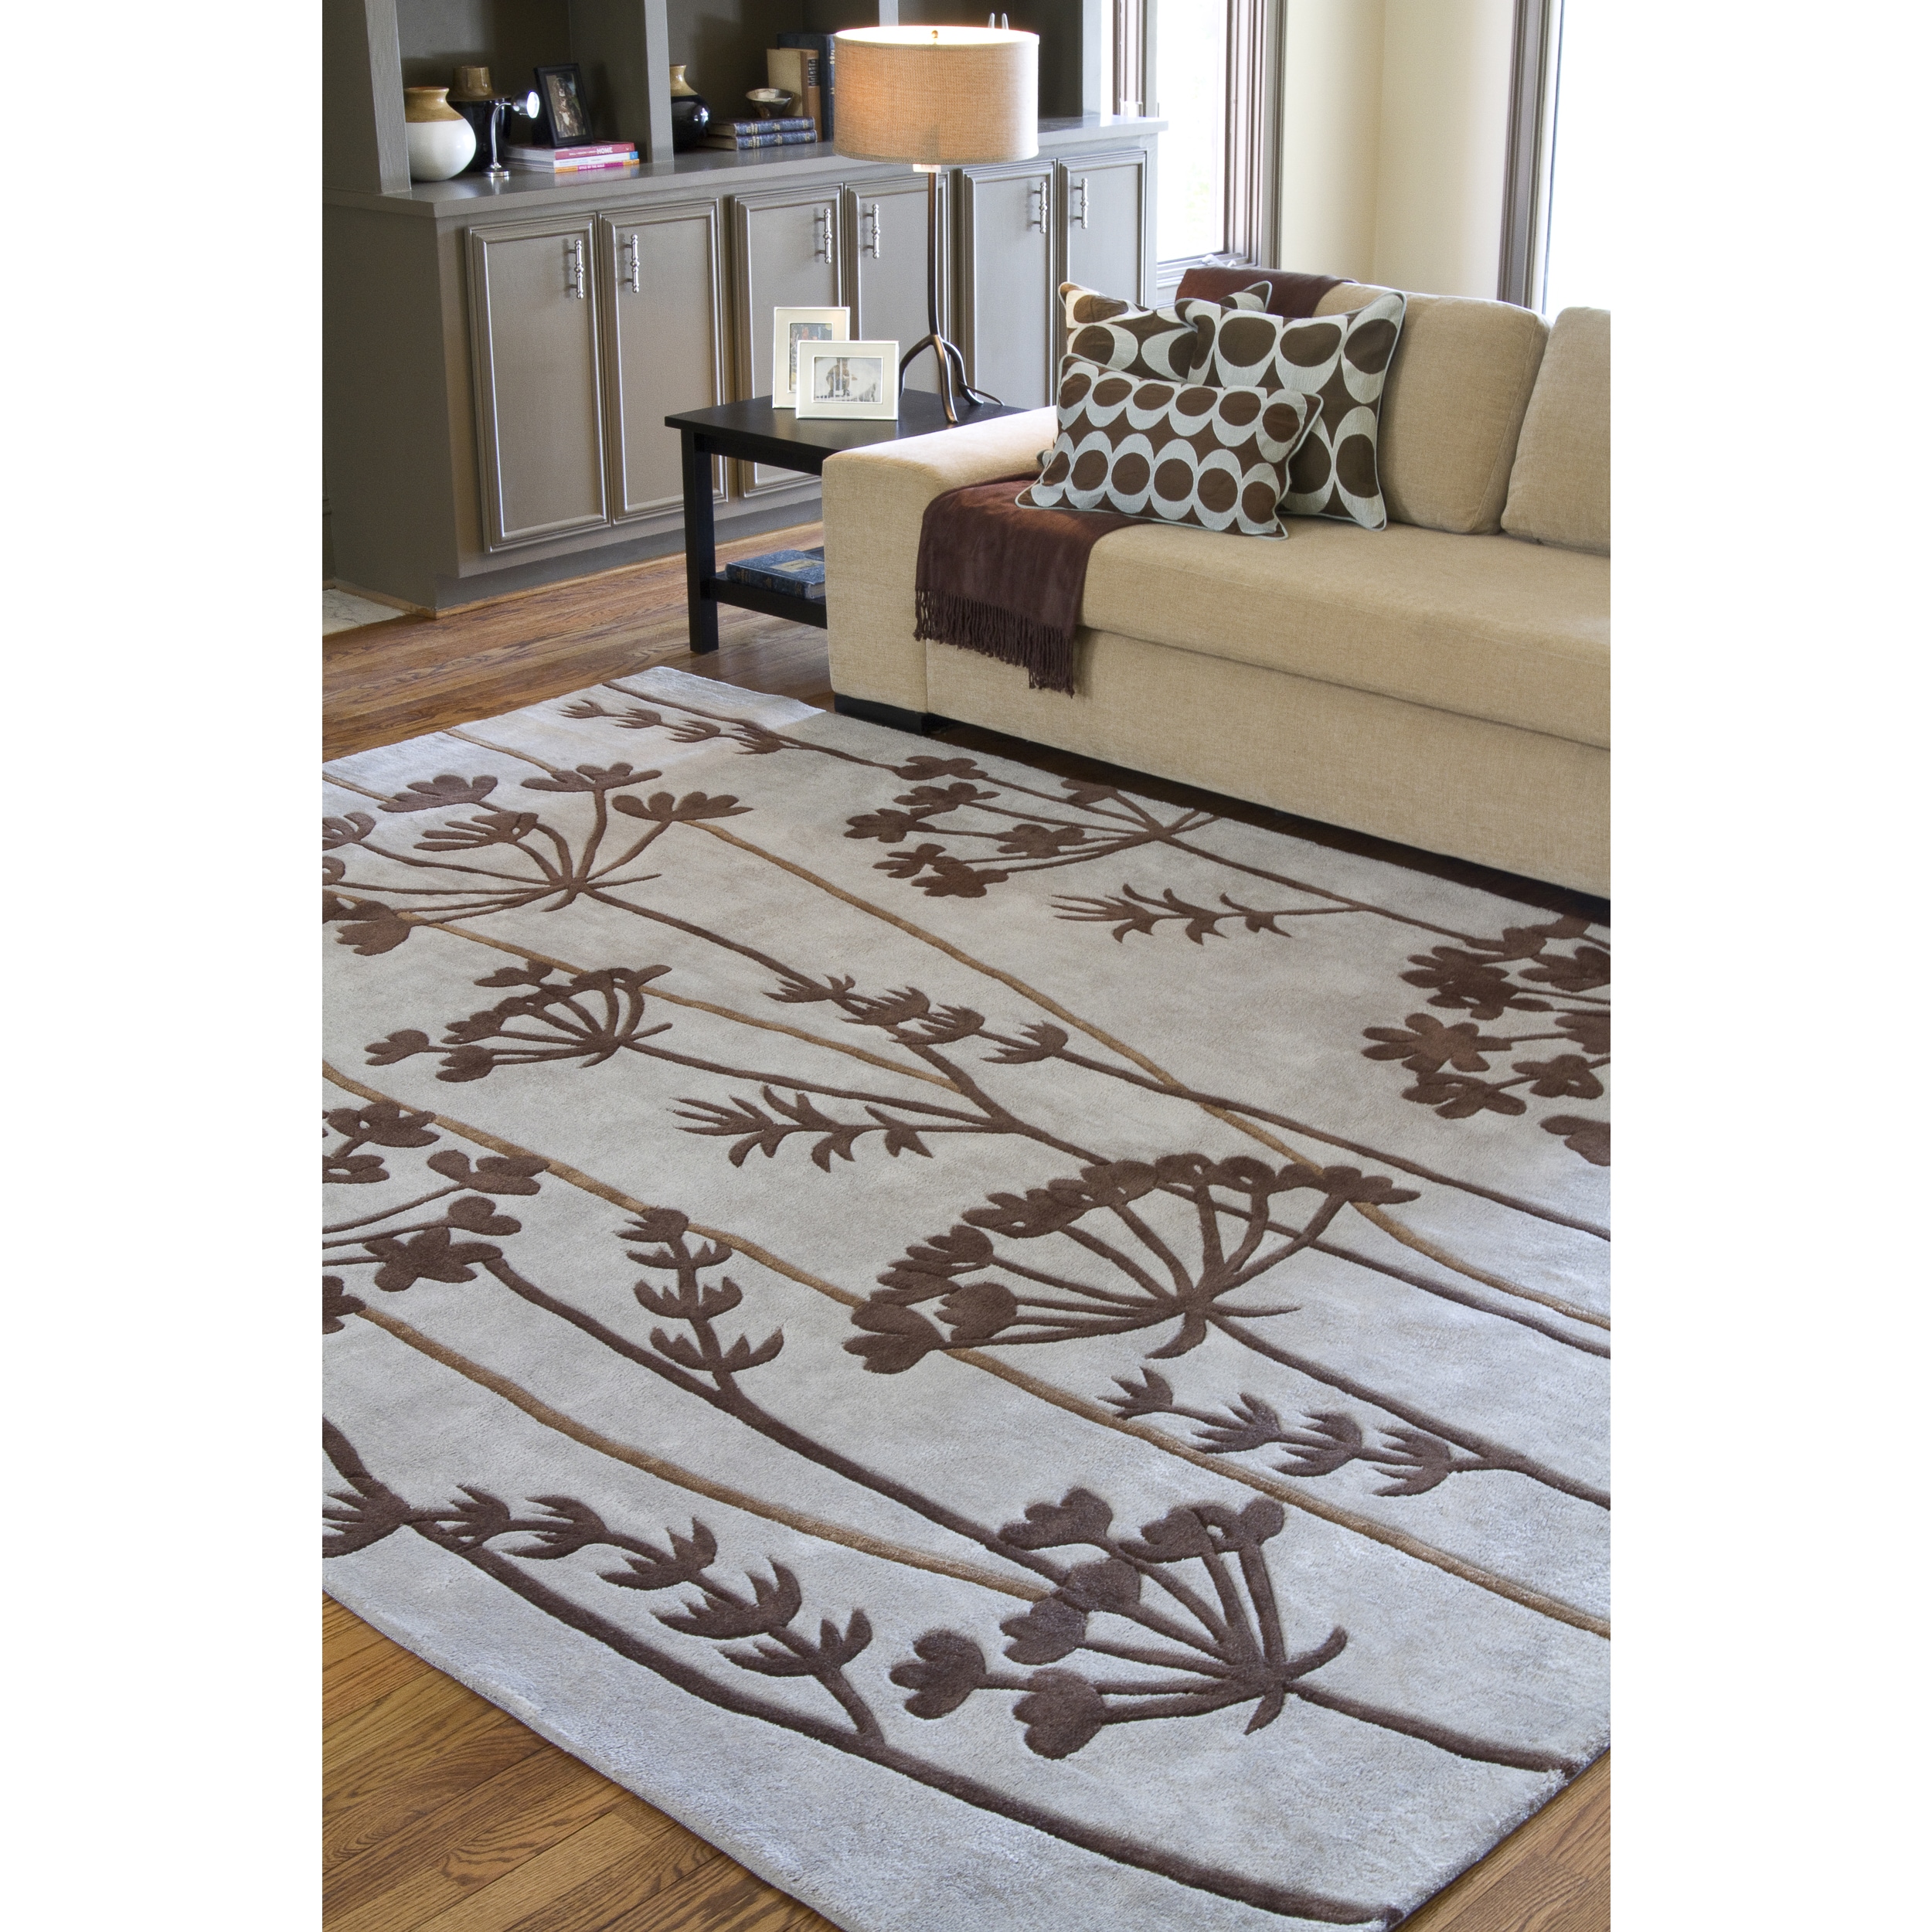 Hand tufted Hork Contemporary Floral Area Rug (5 X 8)